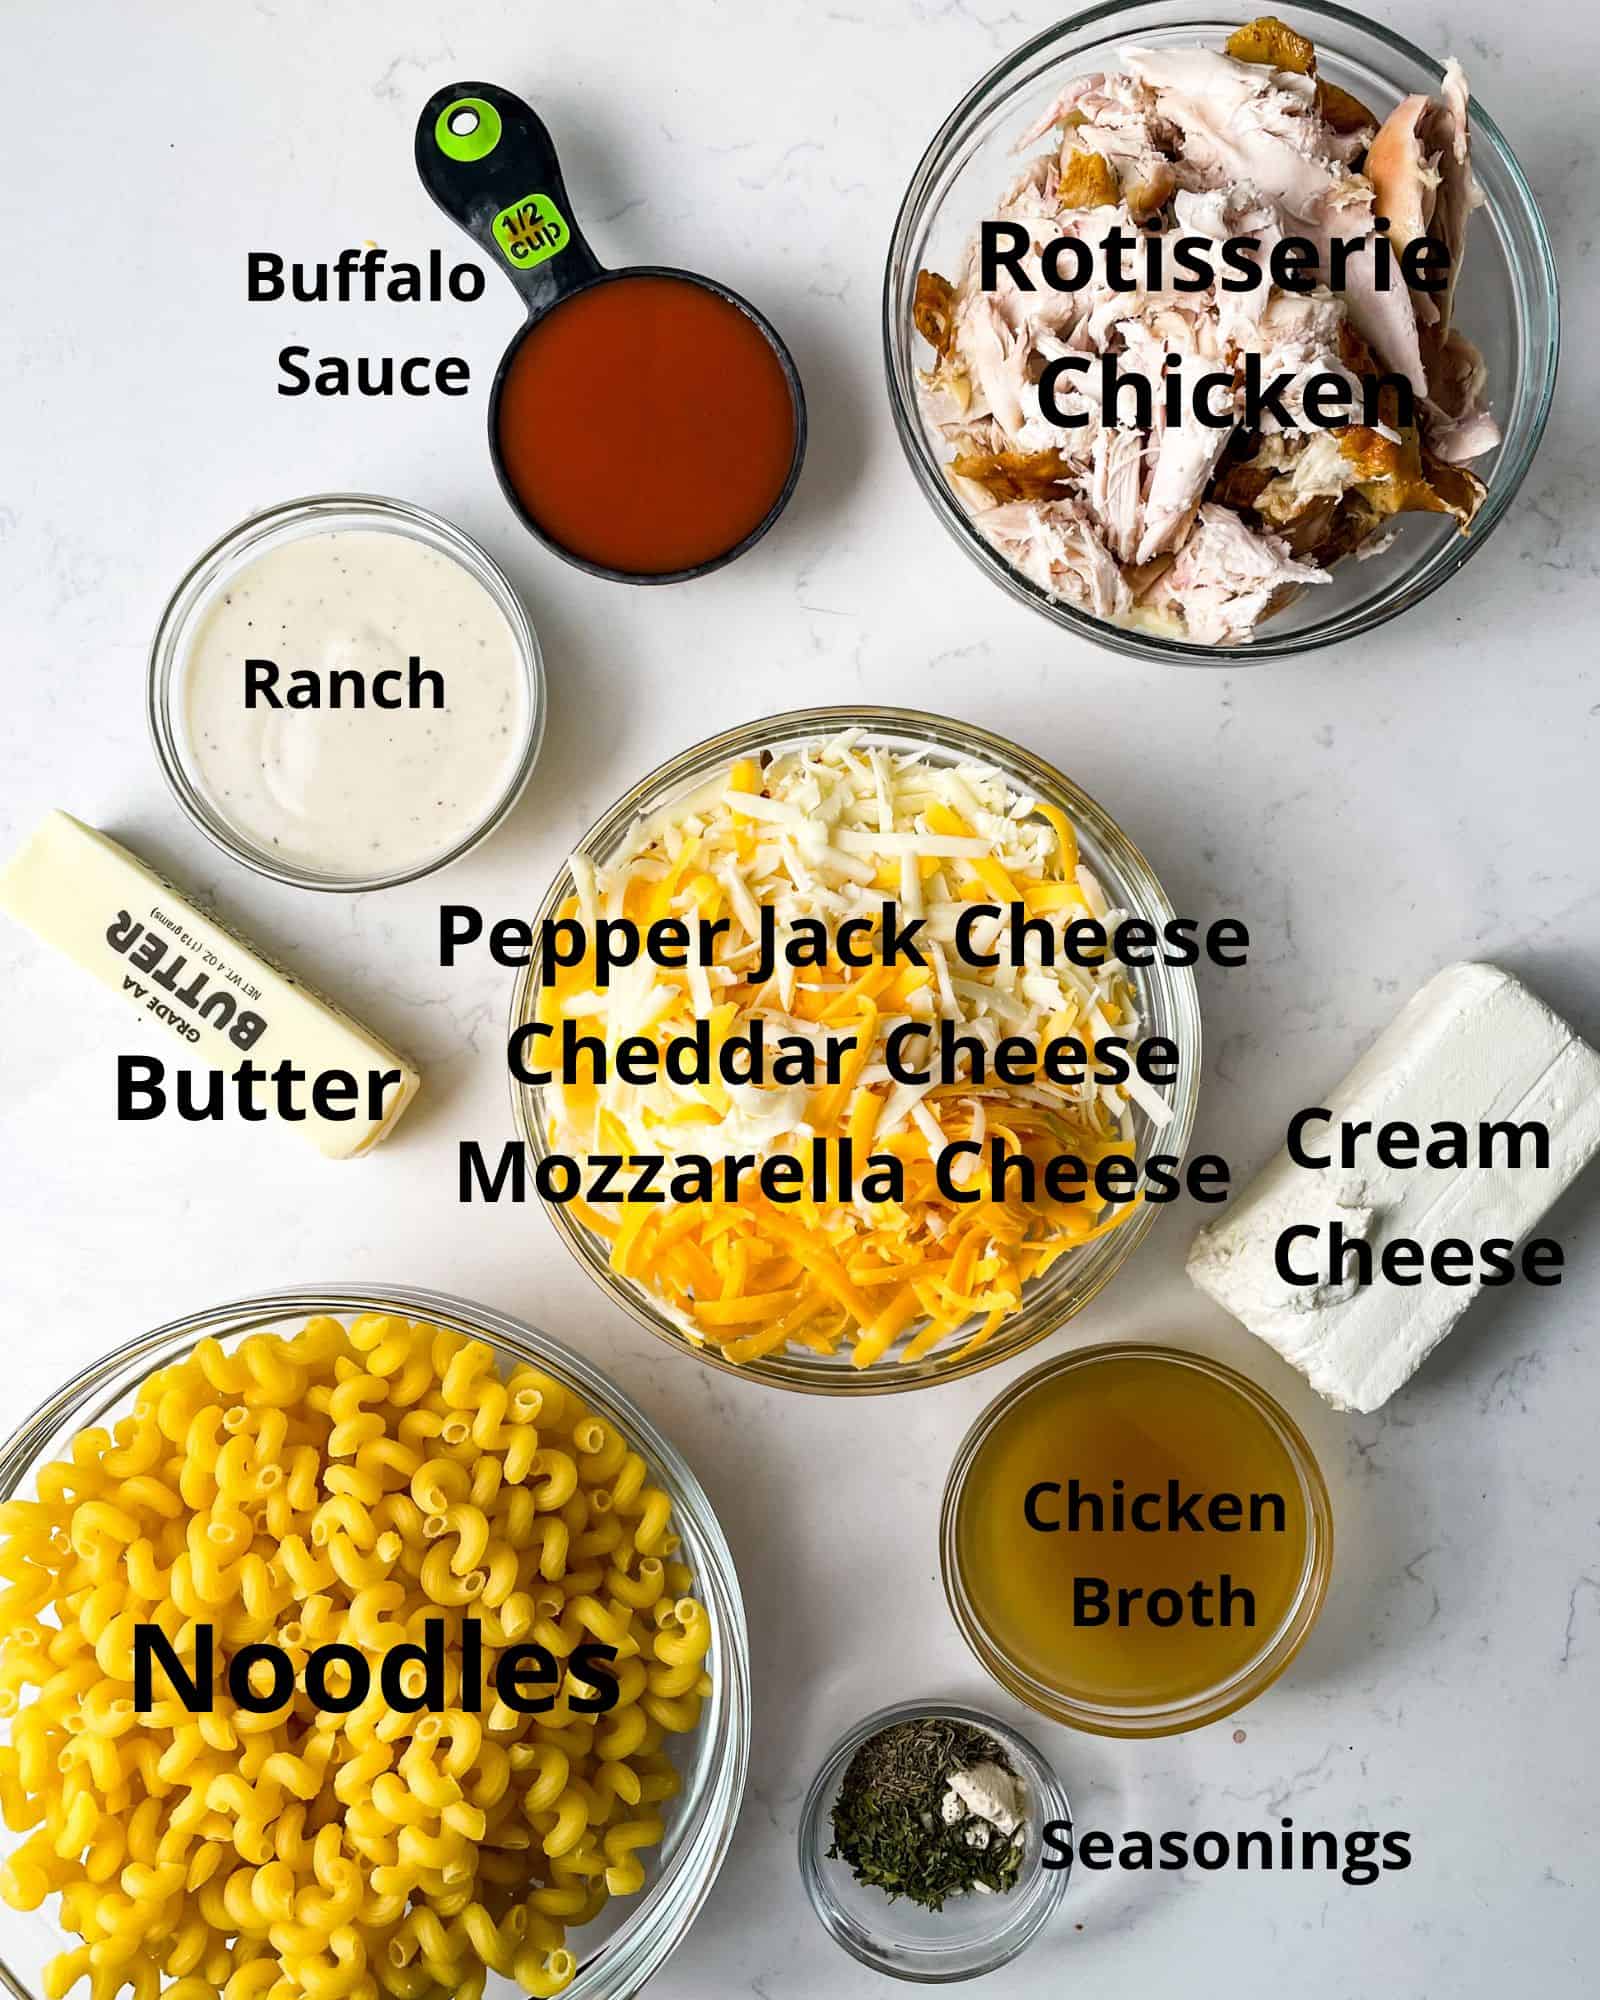 ingredients to make buffalo mac and cheese - chicken, buffalo sauce, ranch dressing, cheese, seasonings, butter, and noodles.